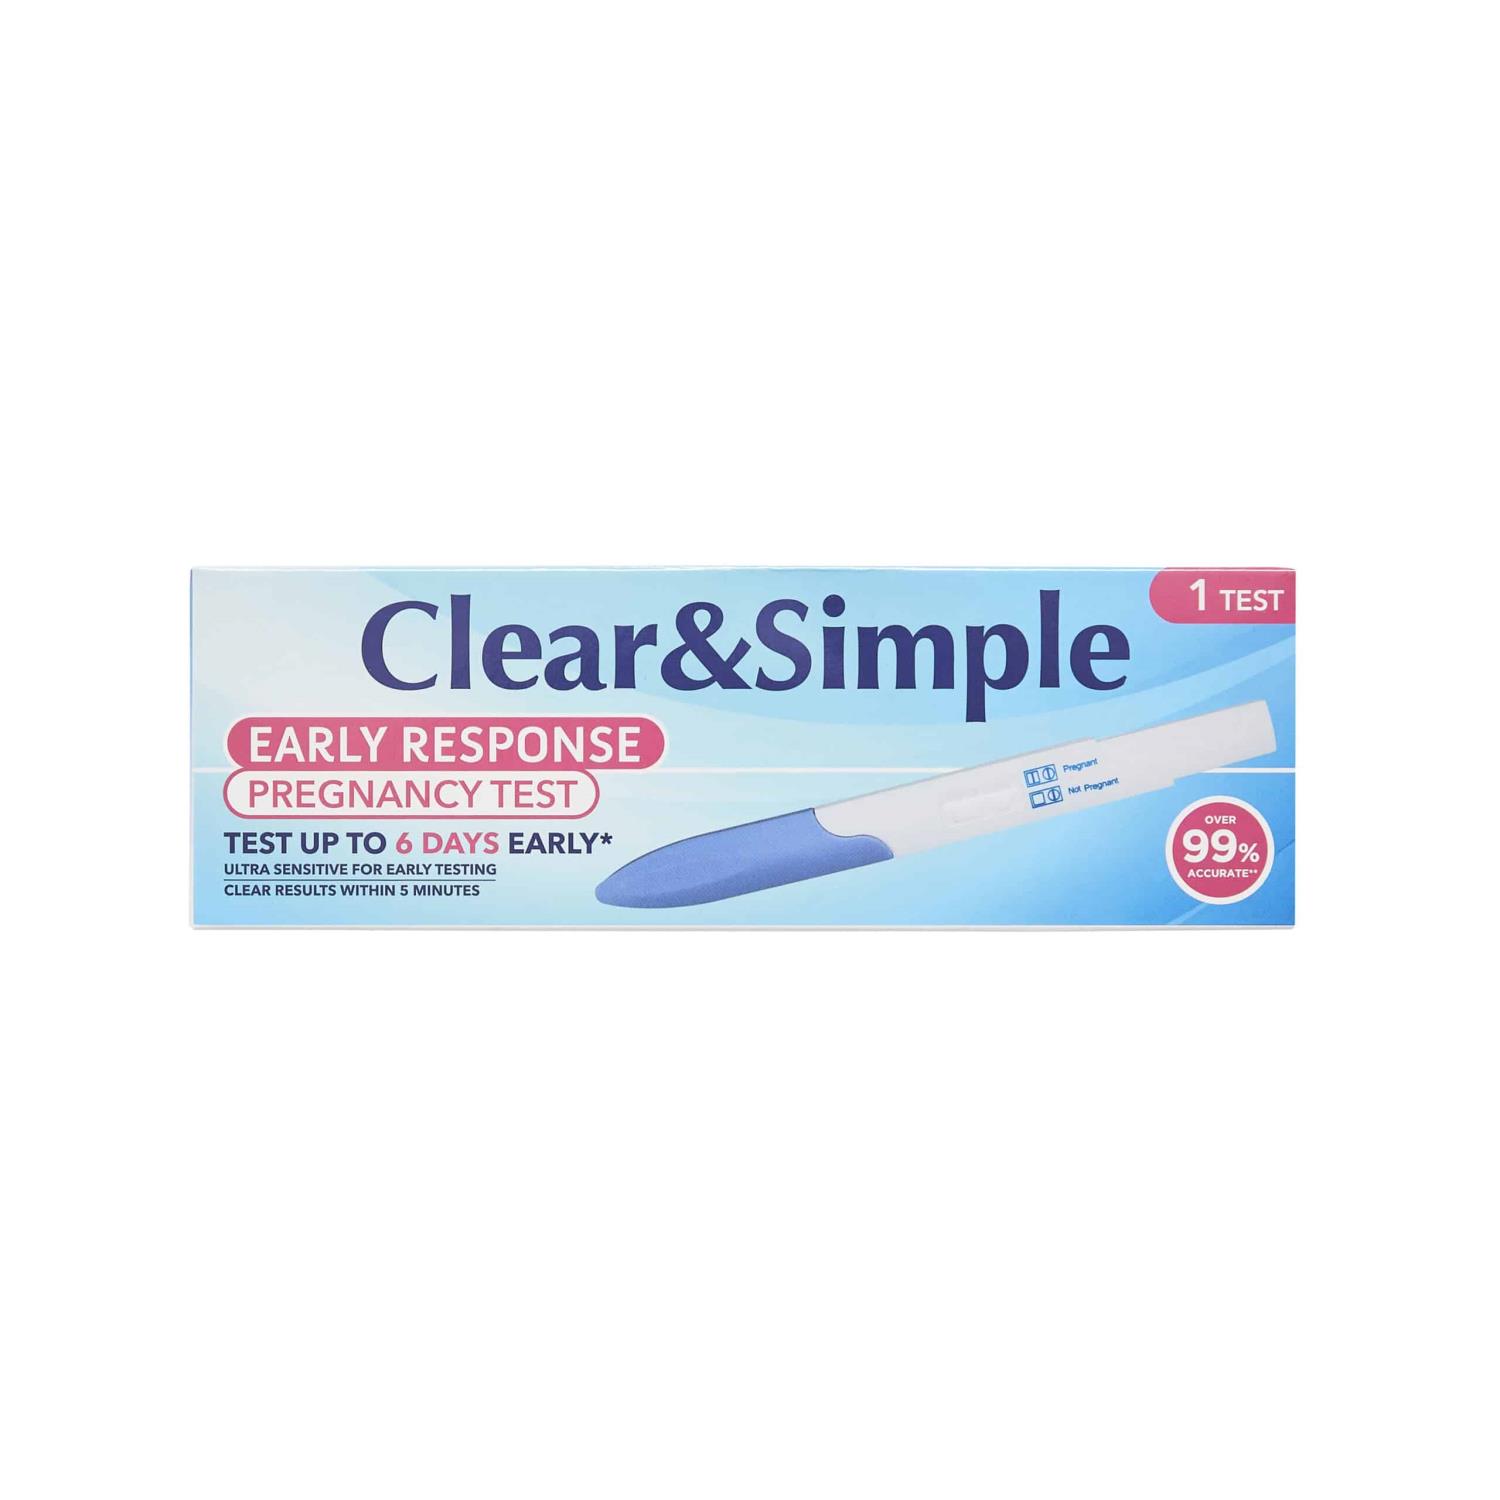 Clear&Simple Early Response Pregnancy Test 1stk